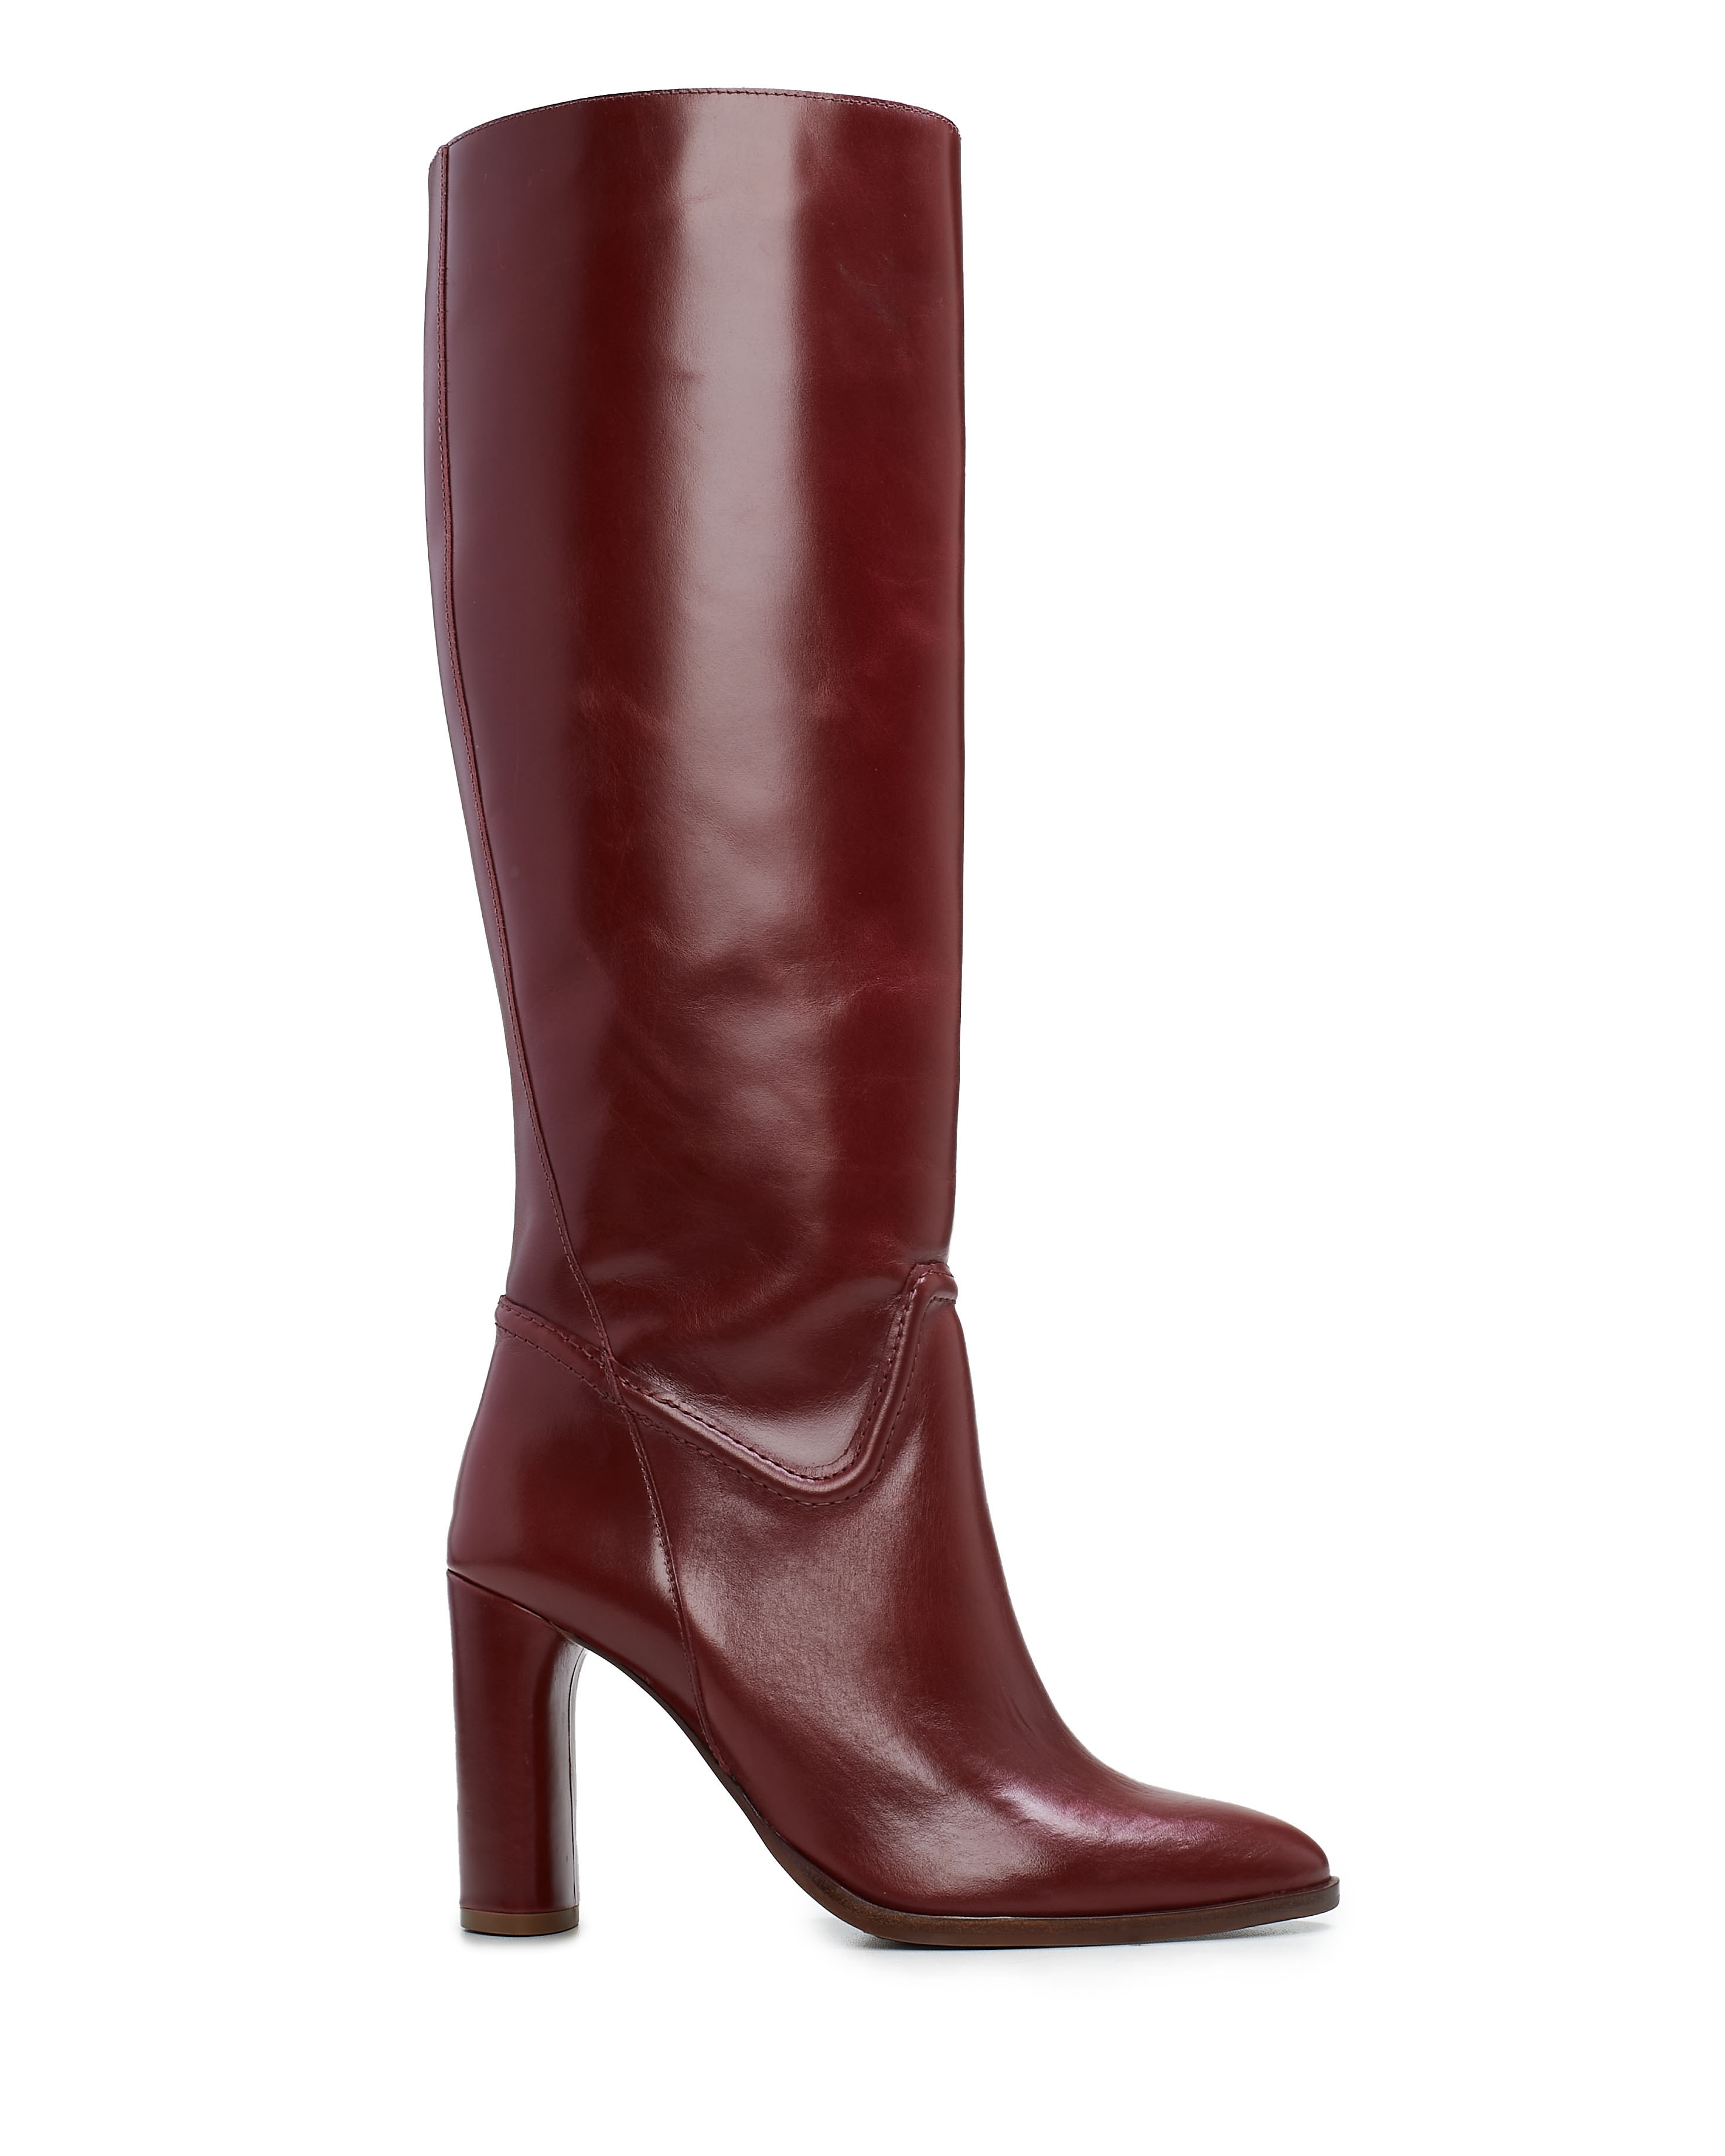 Vince Camuto Evangee Wide-calf Boot